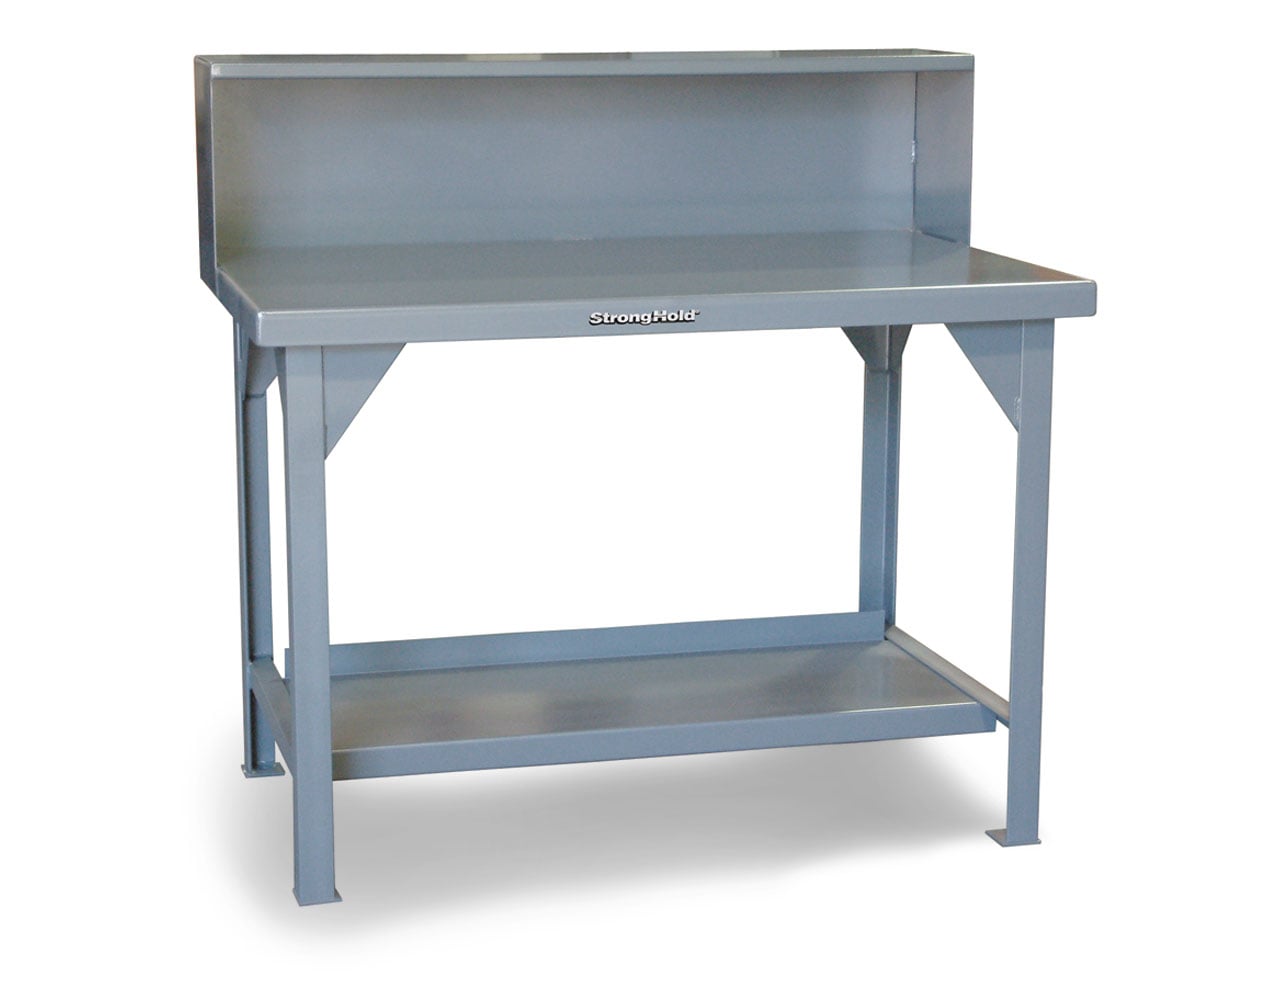 Extreme Duty 7 GA Shop Table with Riser Shelf - 108 In. W x 36 In. D x 46 In. H